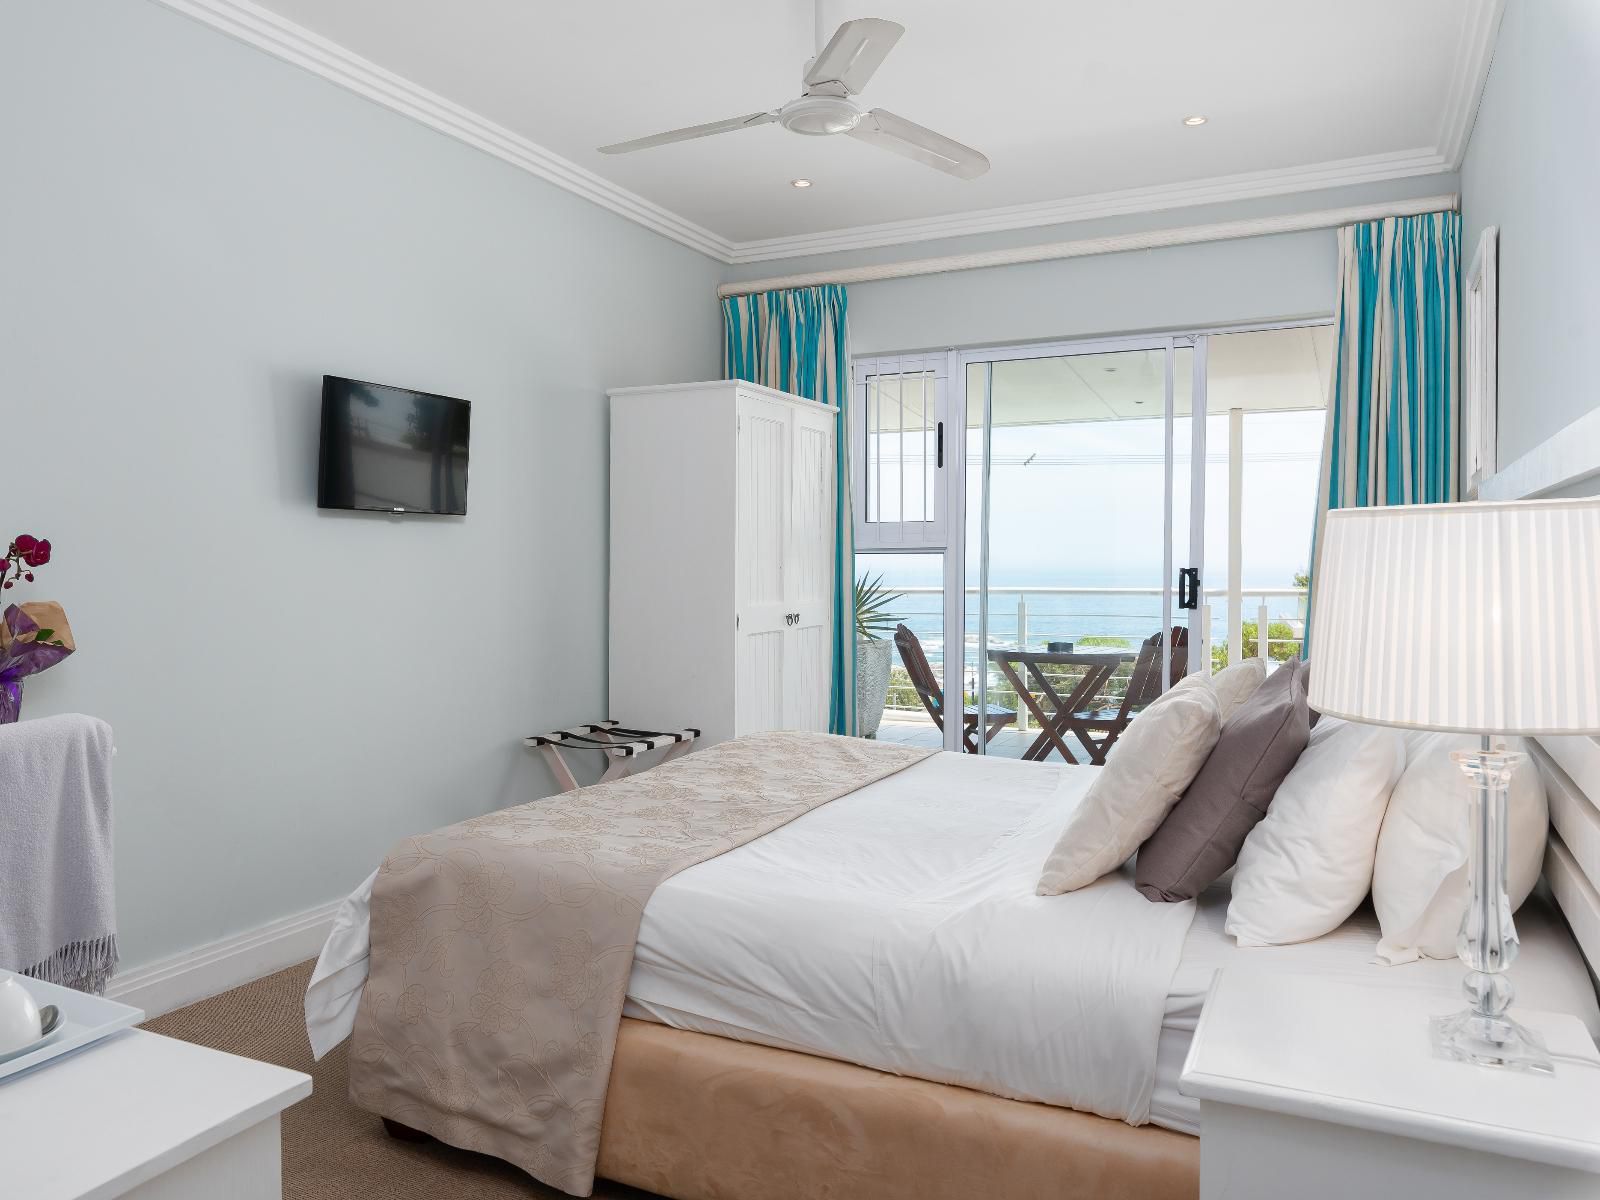 61 On Camps Bay Drive Camps Bay Cape Town Western Cape South Africa Unsaturated, Bedroom